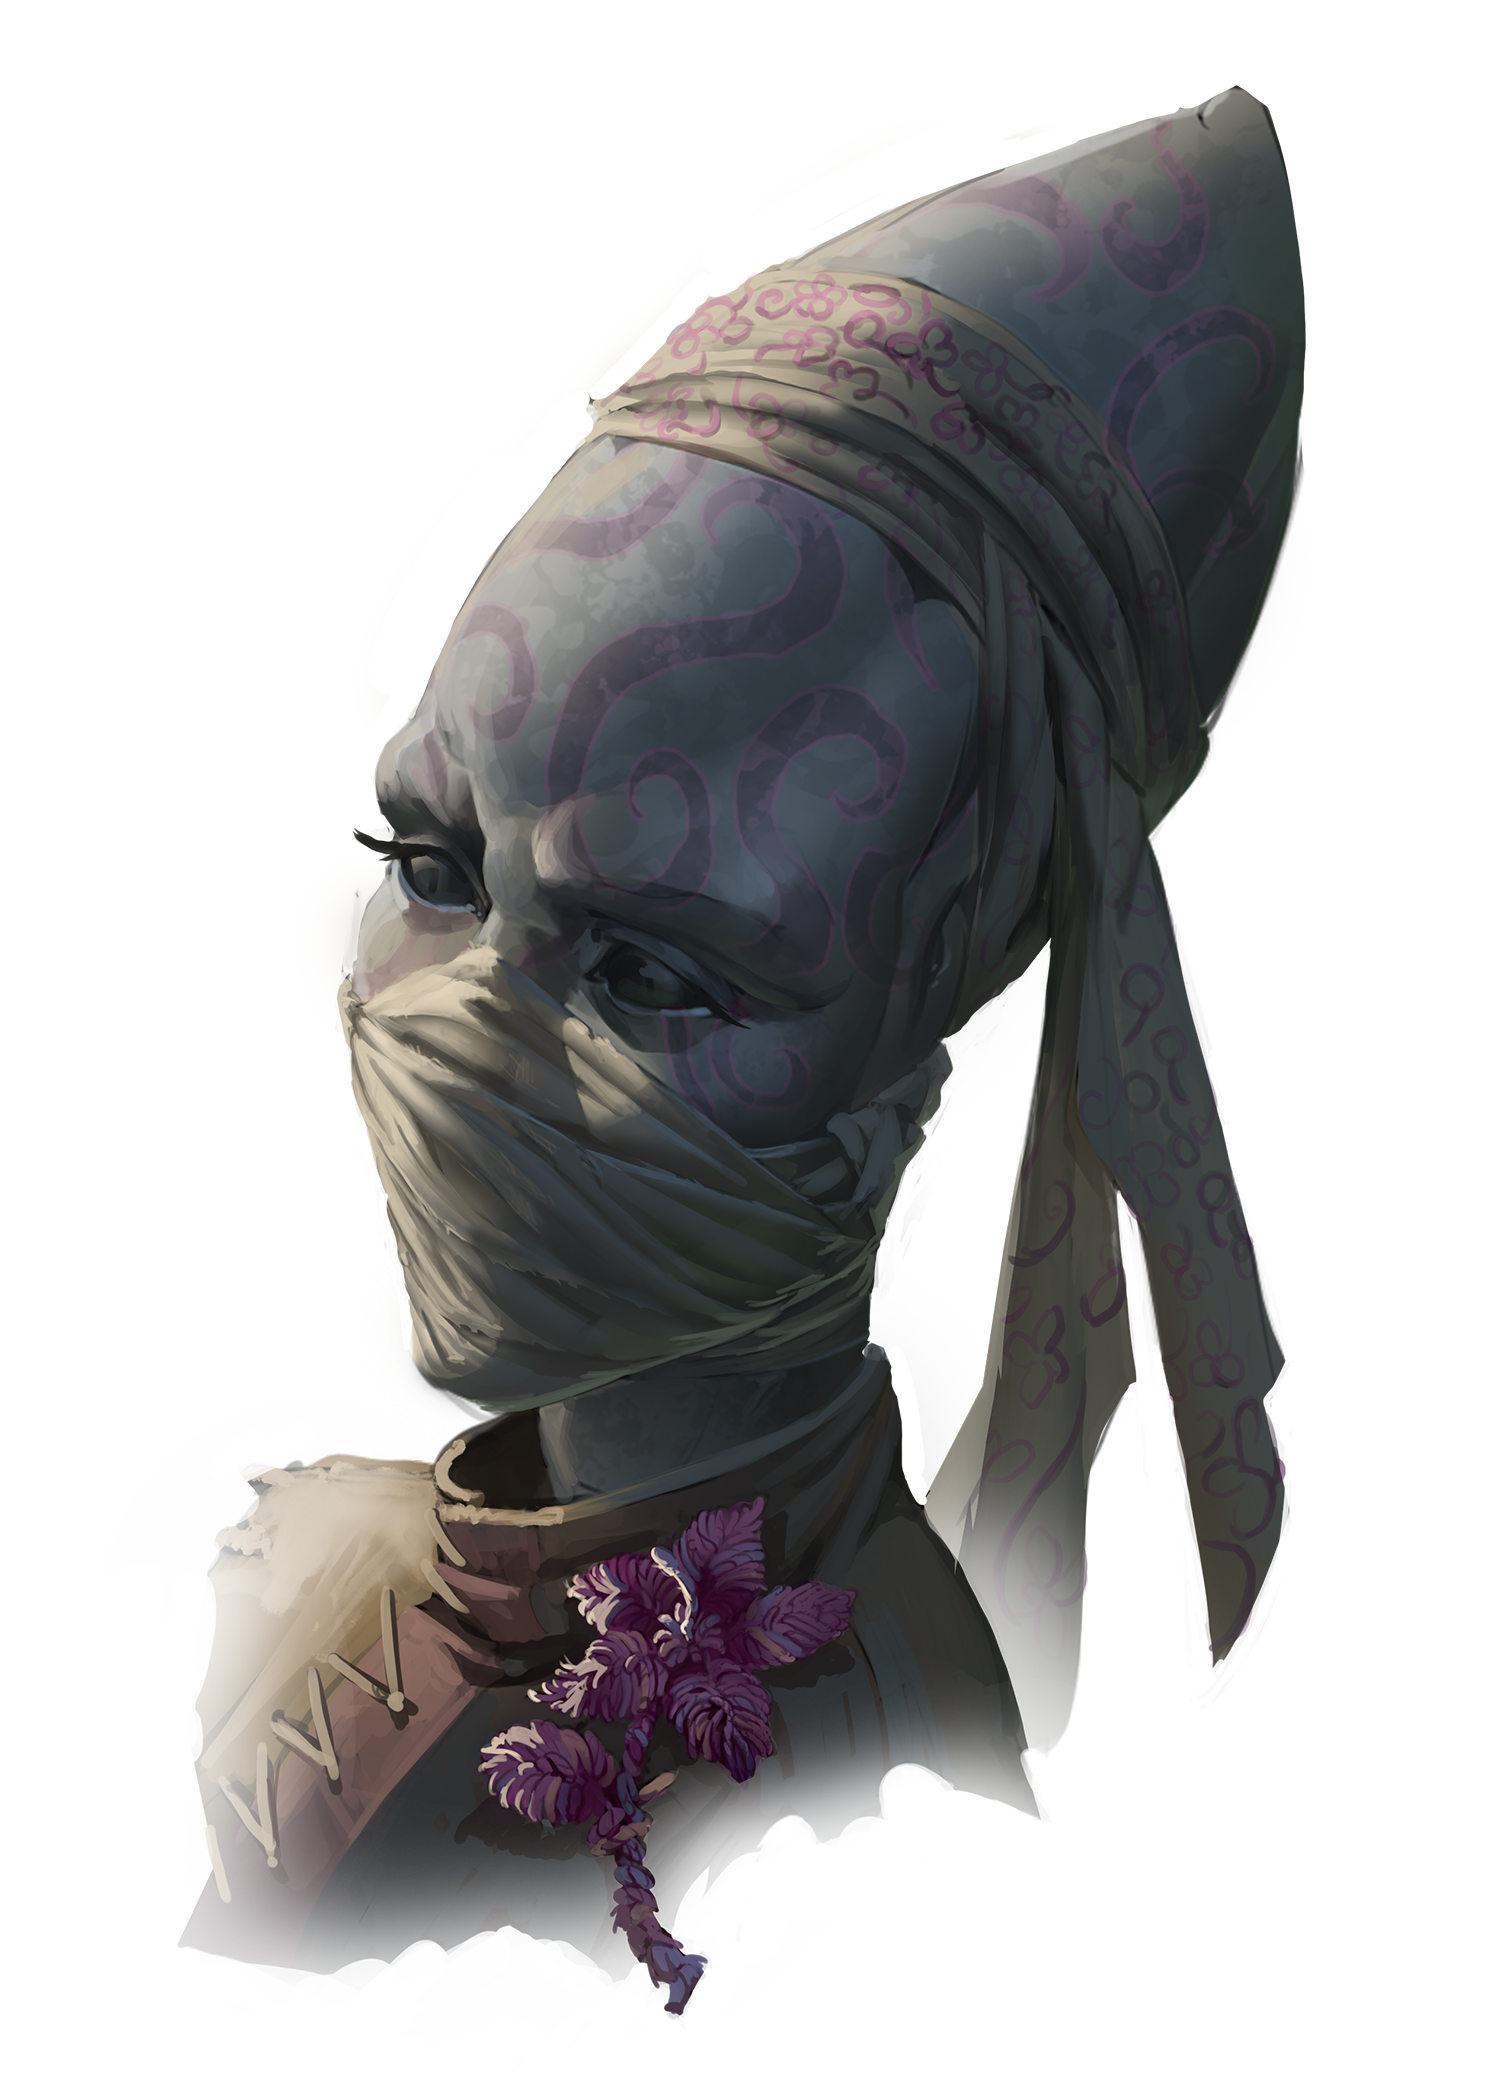 Nindir, one of the missing citizens of the Idari. A female kasatha wearing a cloth mask and headband, and a hand-made crochet purple flower pinned to her collar.